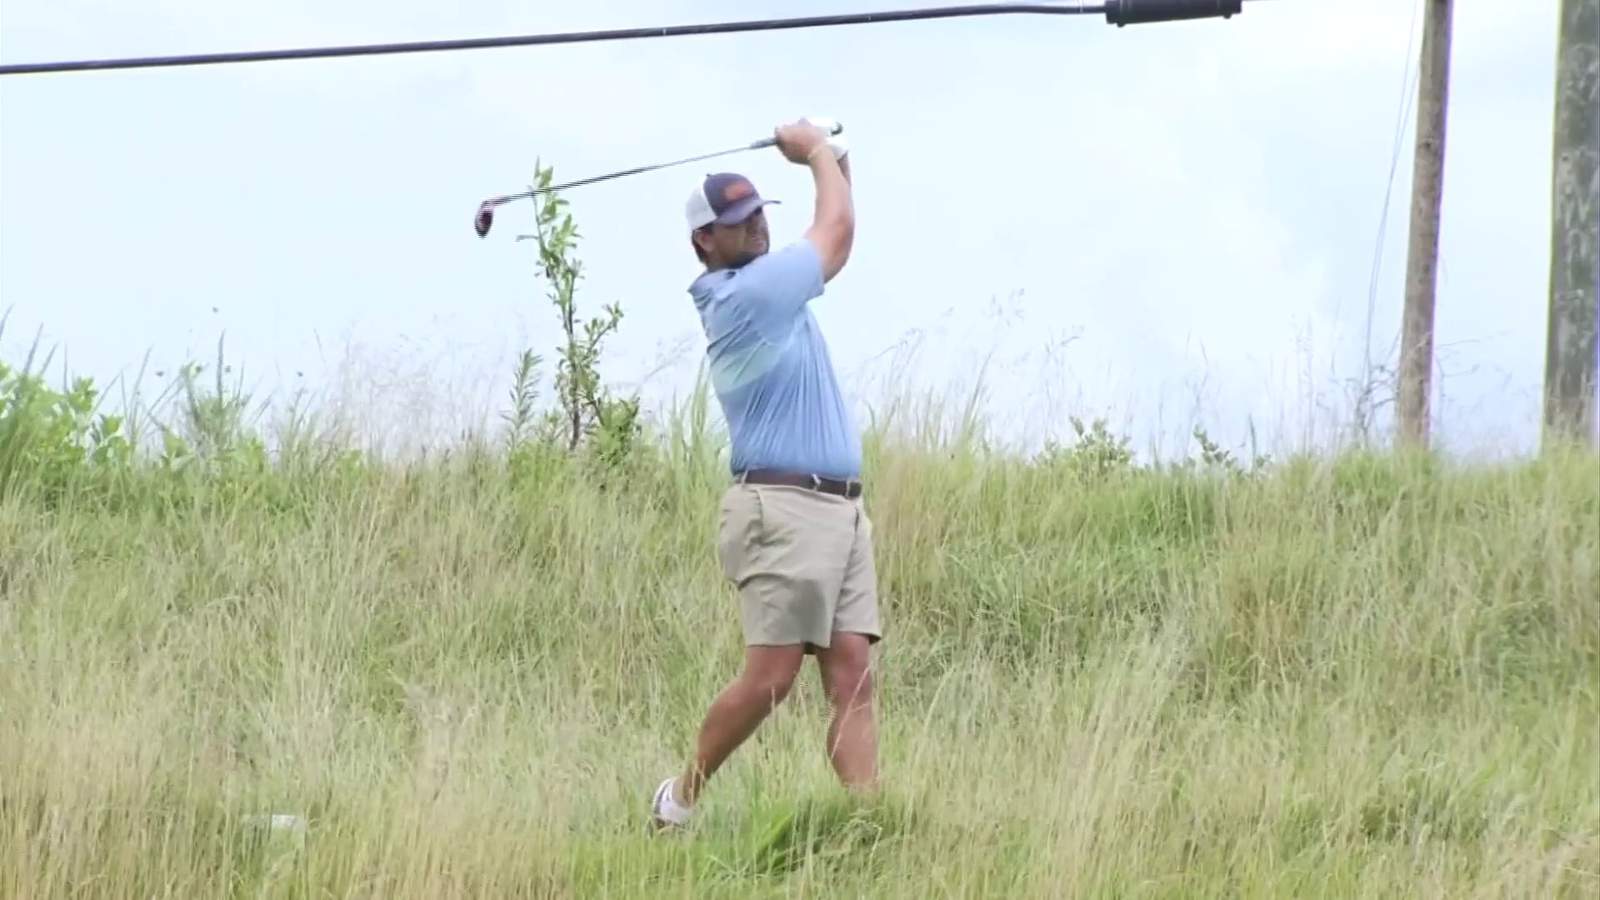 Virginia Tech’s Mark Lawrence Jr. still leading the way in Day 2 of Delta Dental State Open